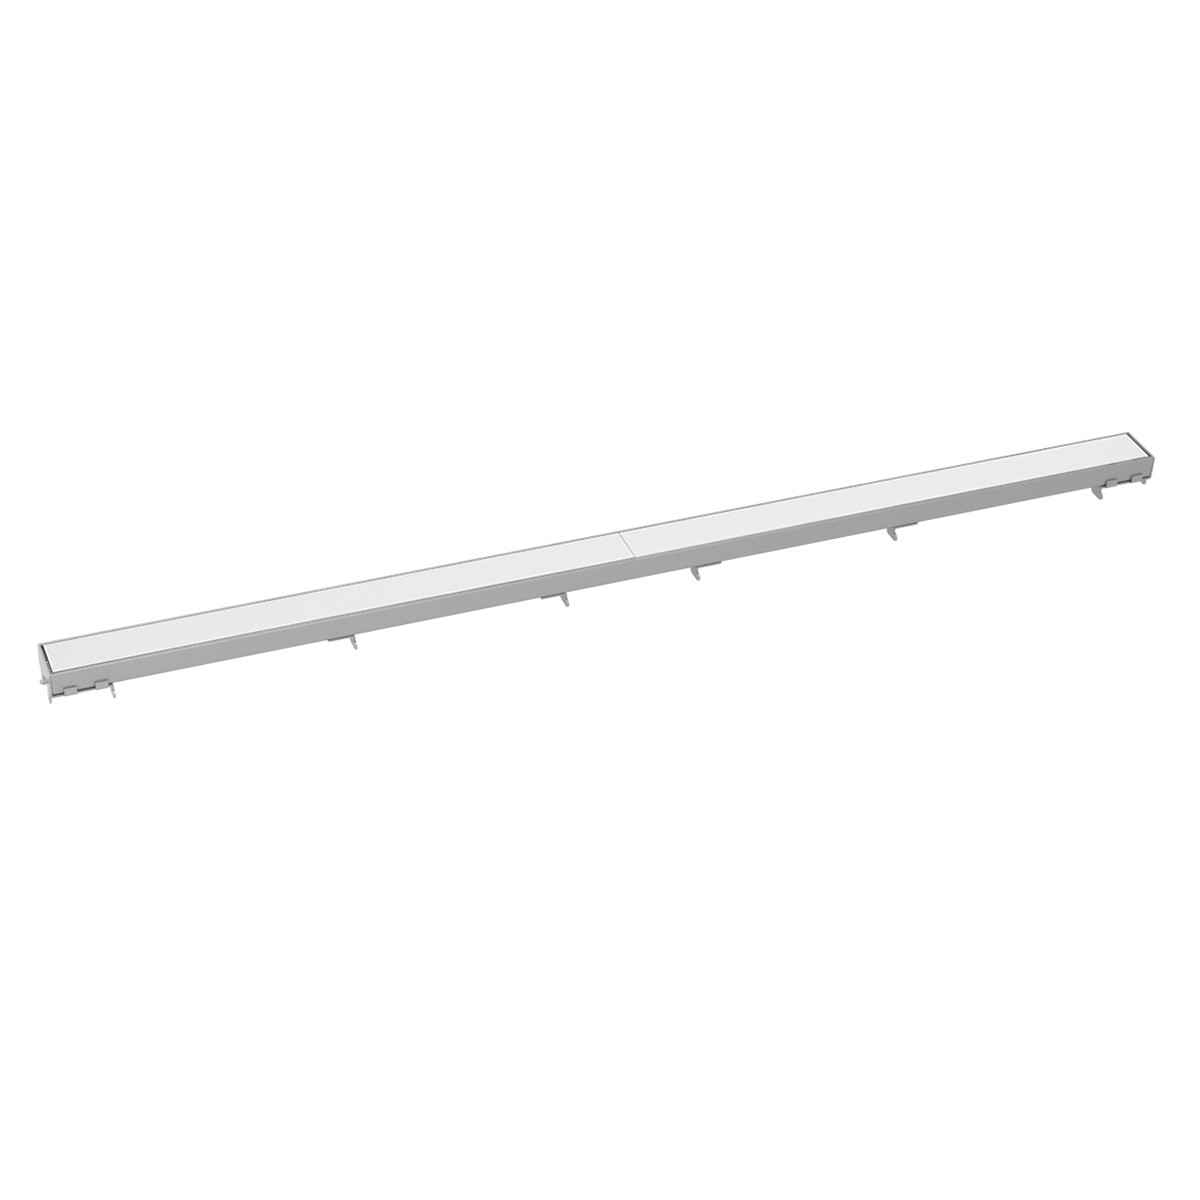 Infinity Drain 20" TA 6520 SS Linear Drain Grate: Satin Stainless